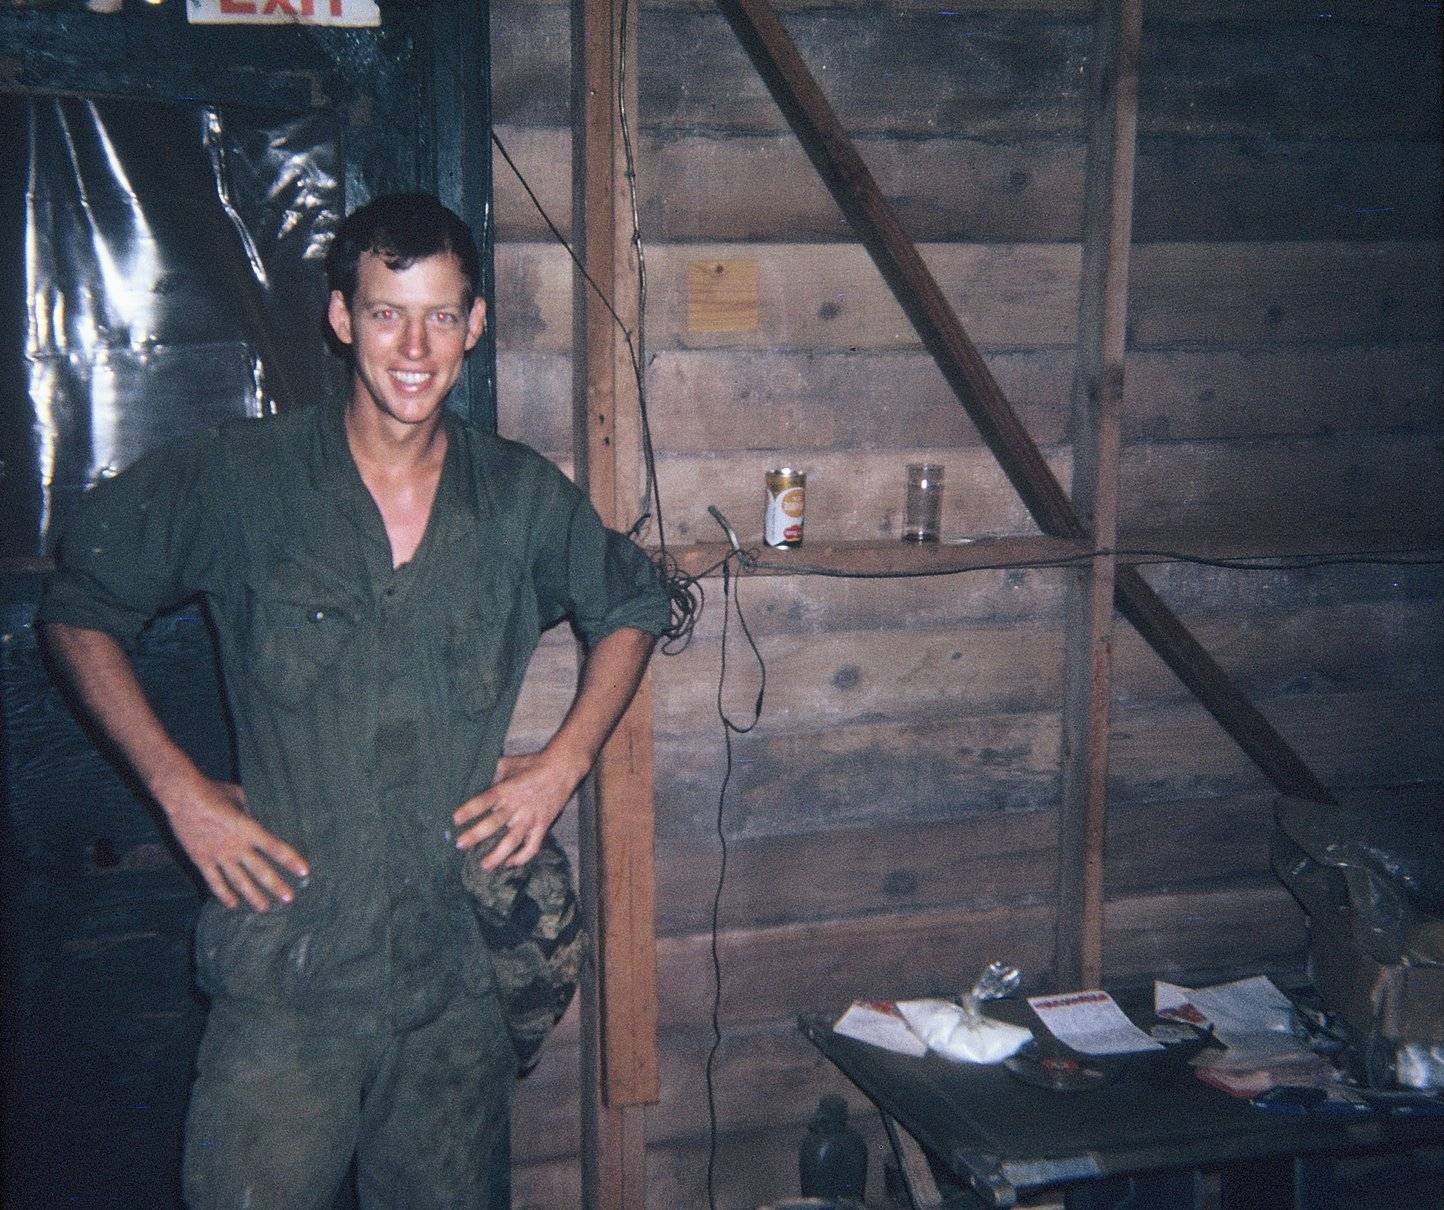 Young U.S. soldier in a barracks at night, smiling and with his hands on his hips.